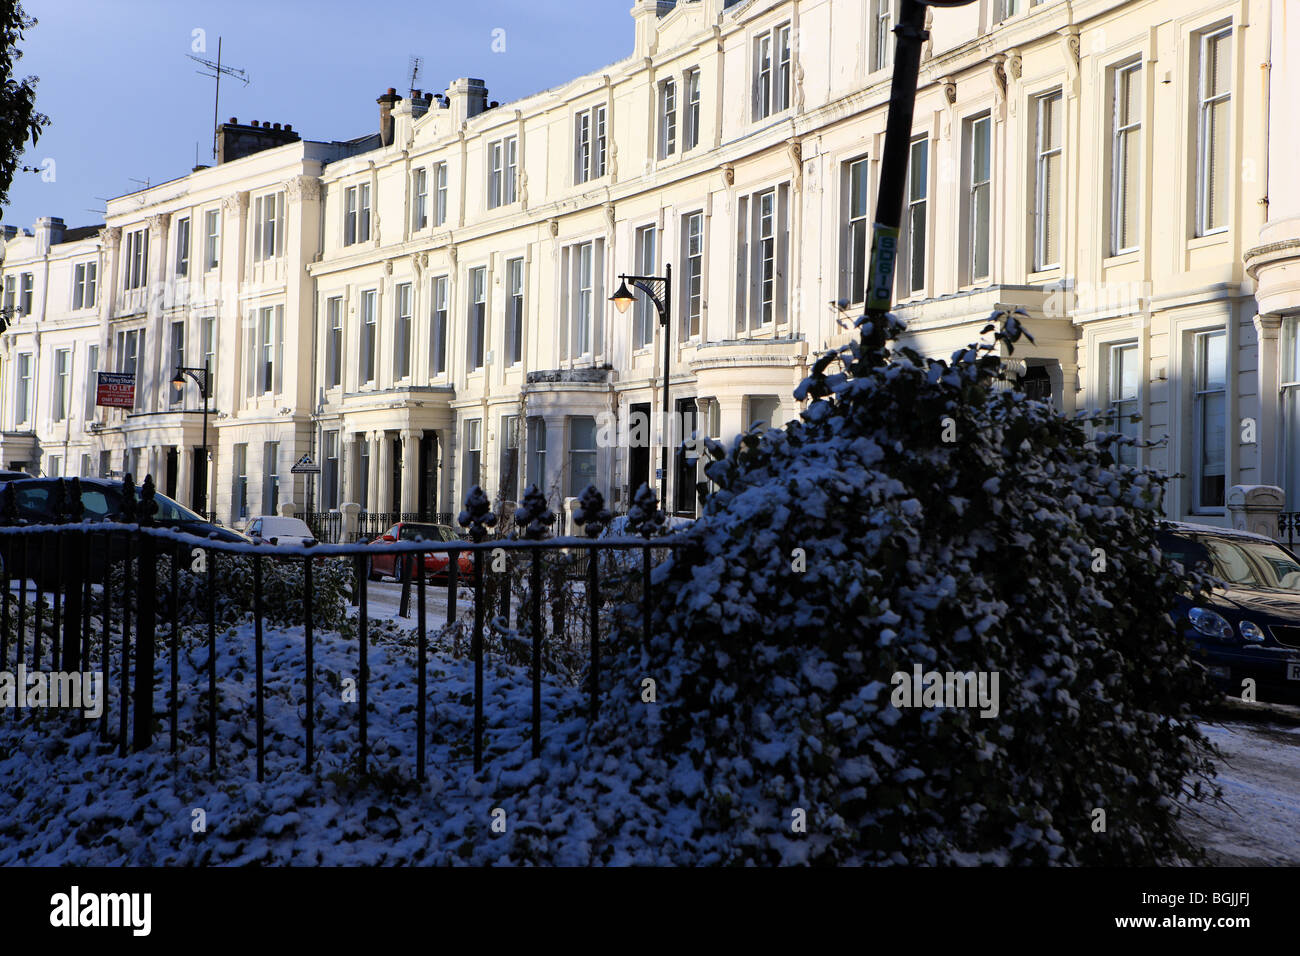 Glasgow Victorian terrace housing with garden covered in snow Stock Photo